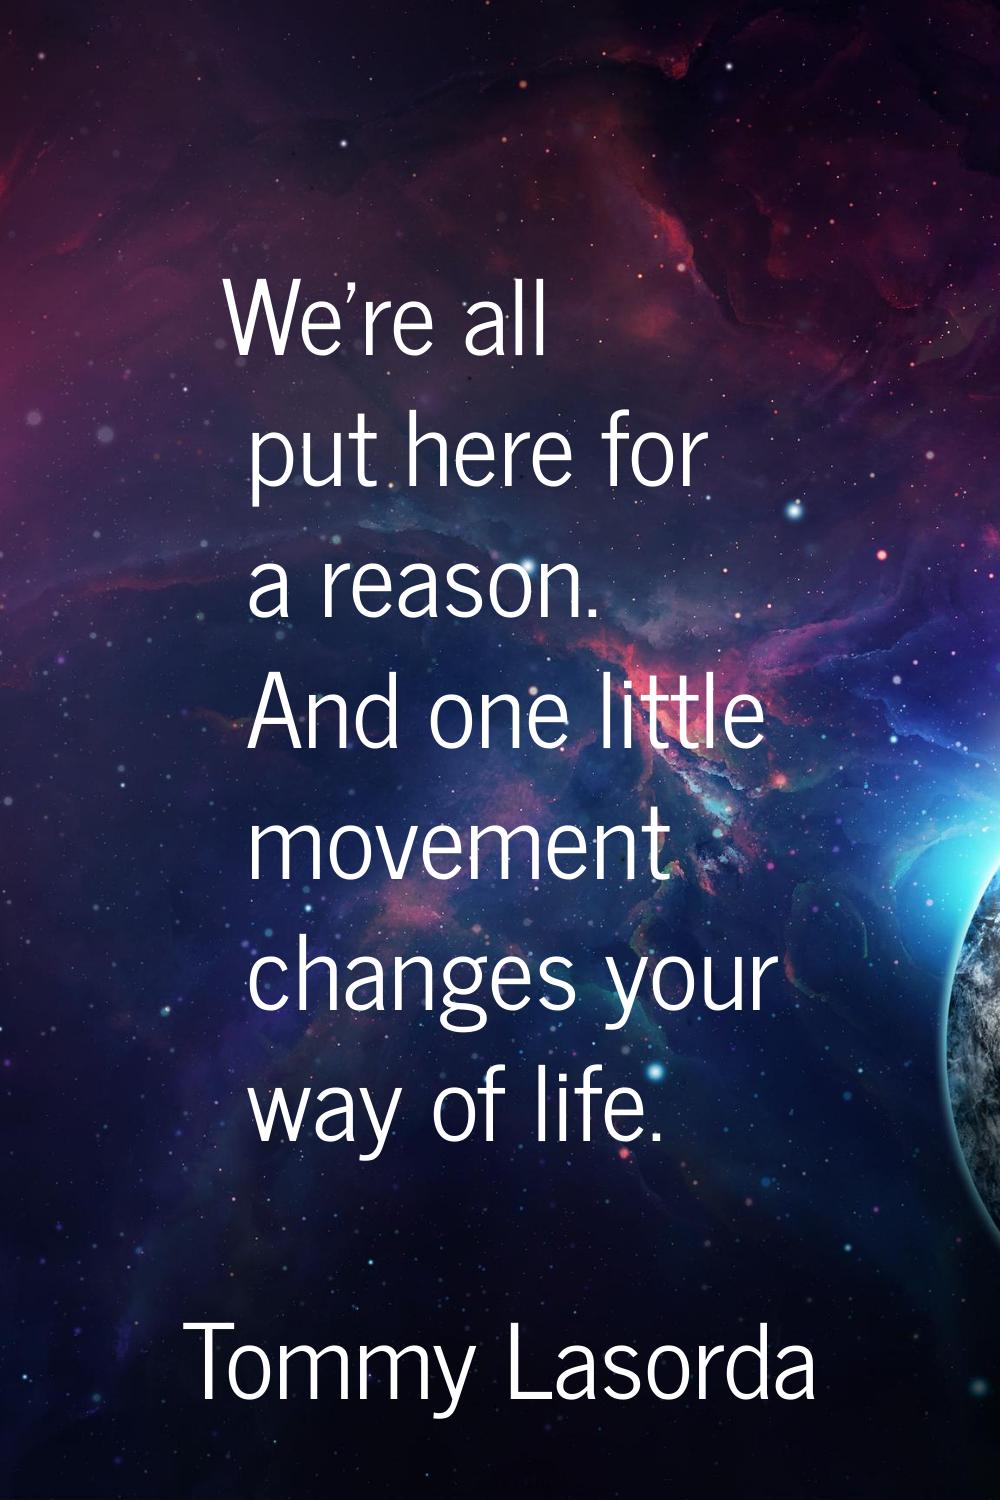 We're all put here for a reason. And one little movement changes your way of life.